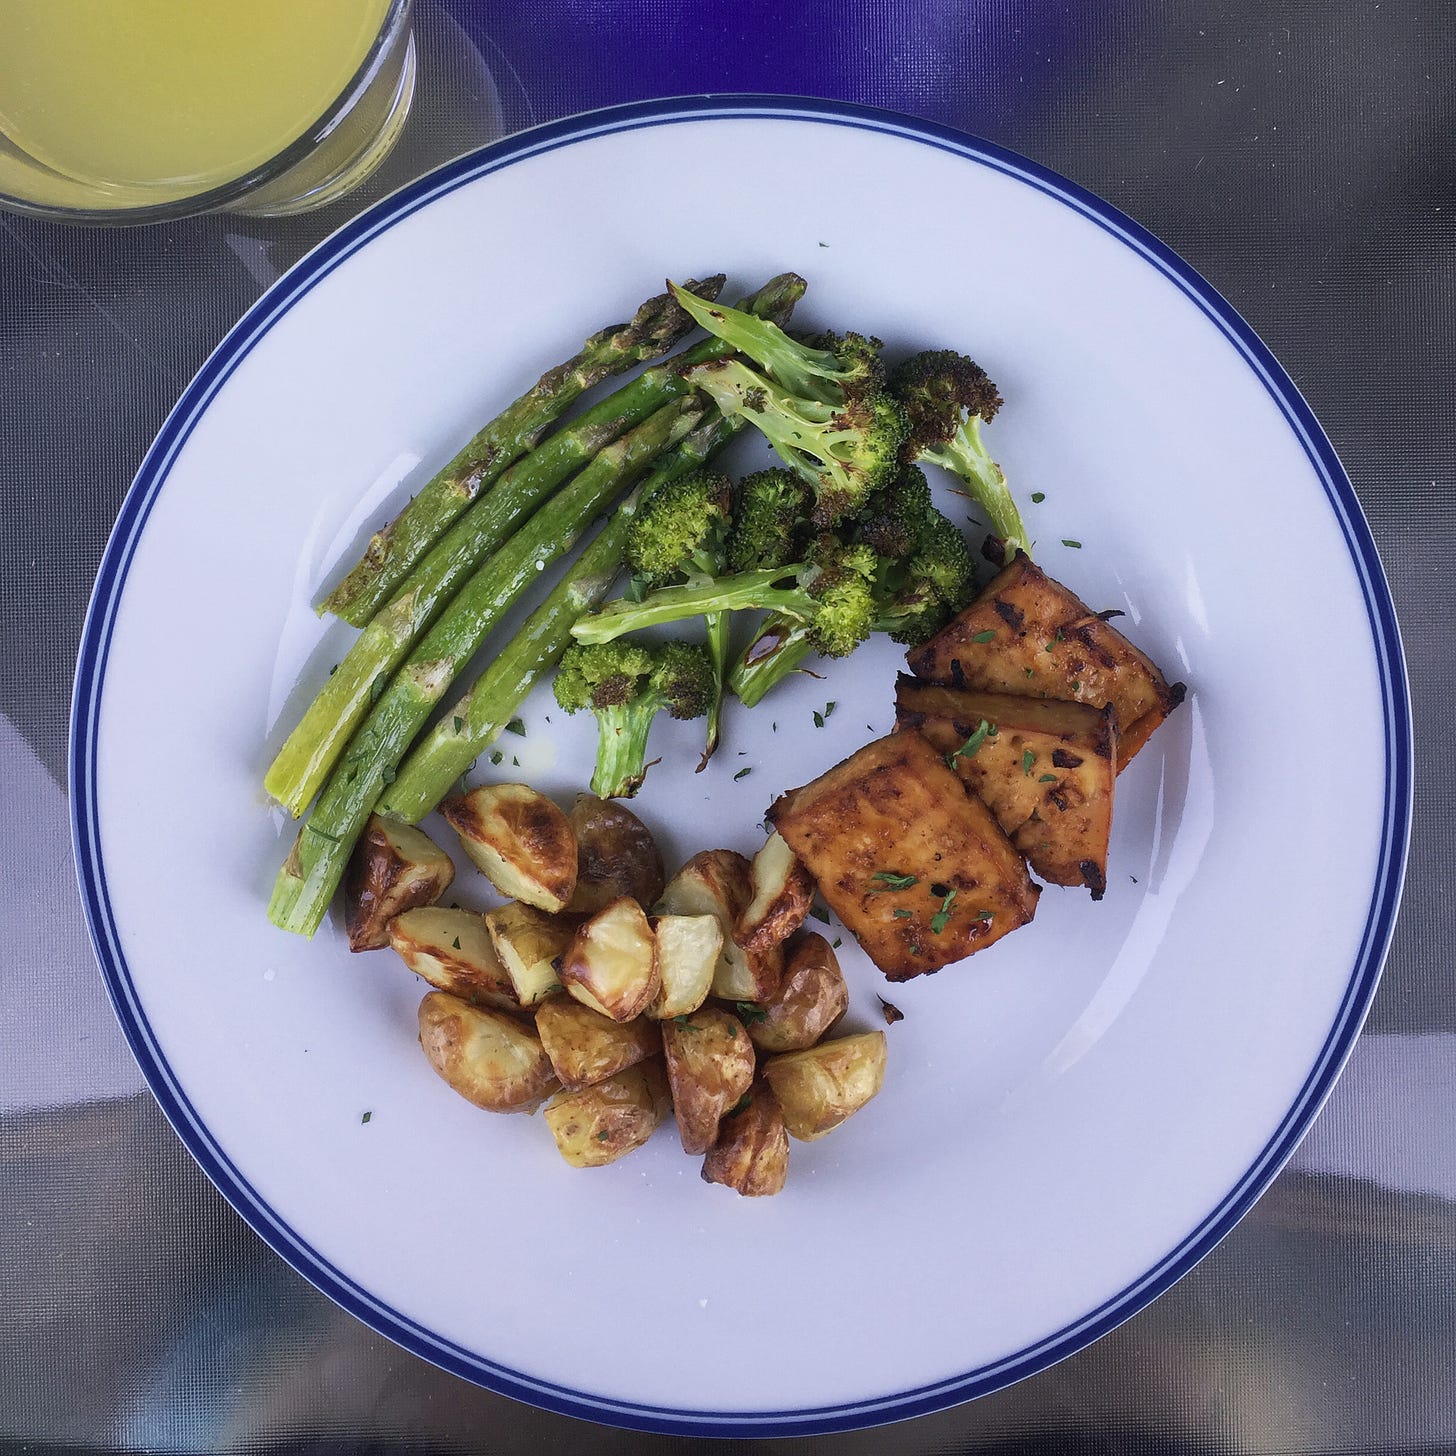 from above, a white plate with a blue rim holds small piles of roasted potatoes, broccoli, and asparagus. Three squares of marinated tofu sit to their right.